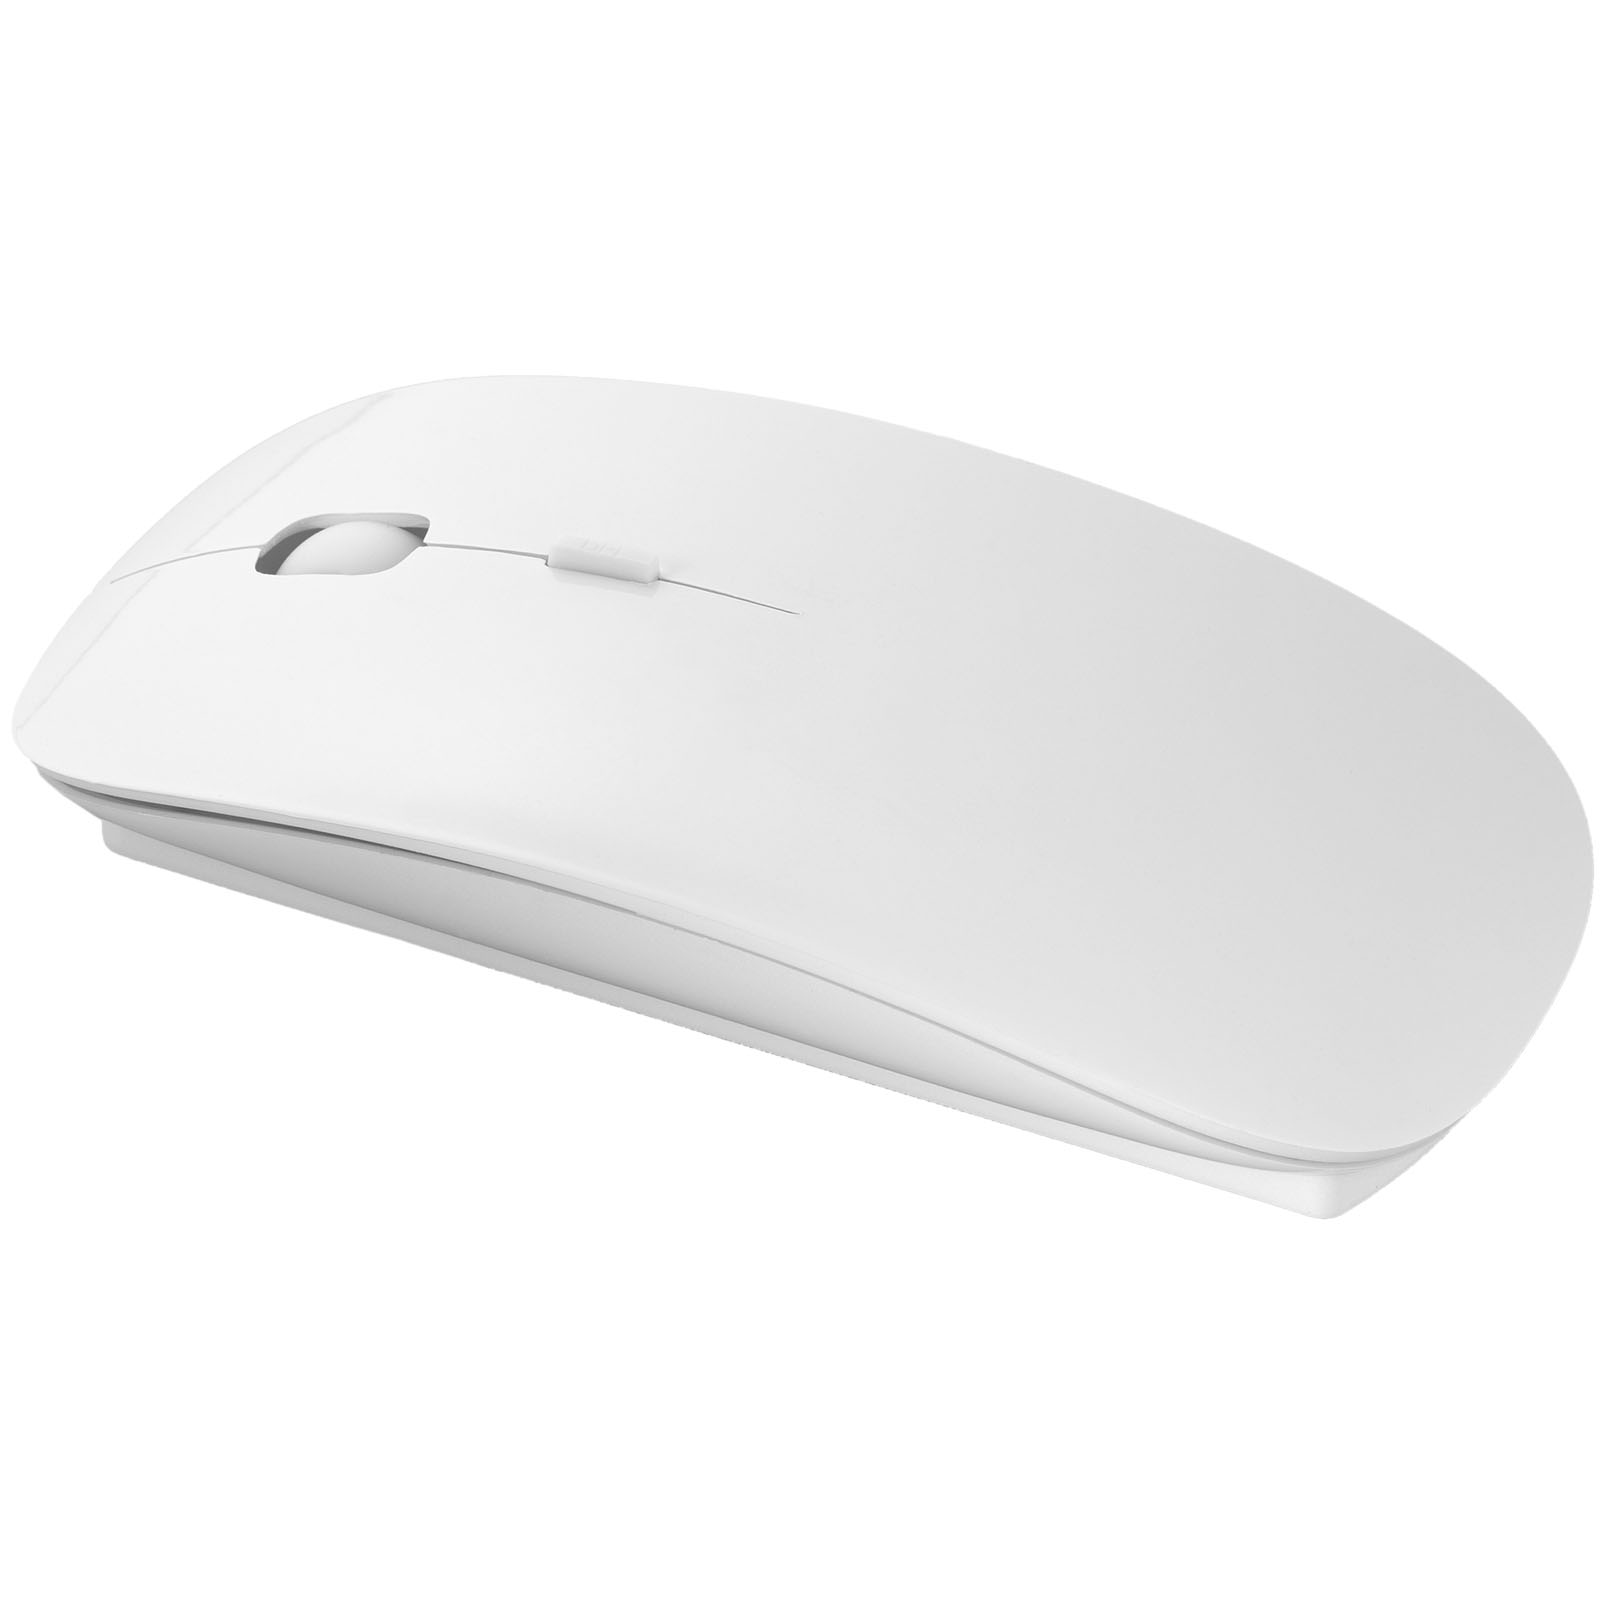 Wireless mouse RAZED with sensitivity change function - white